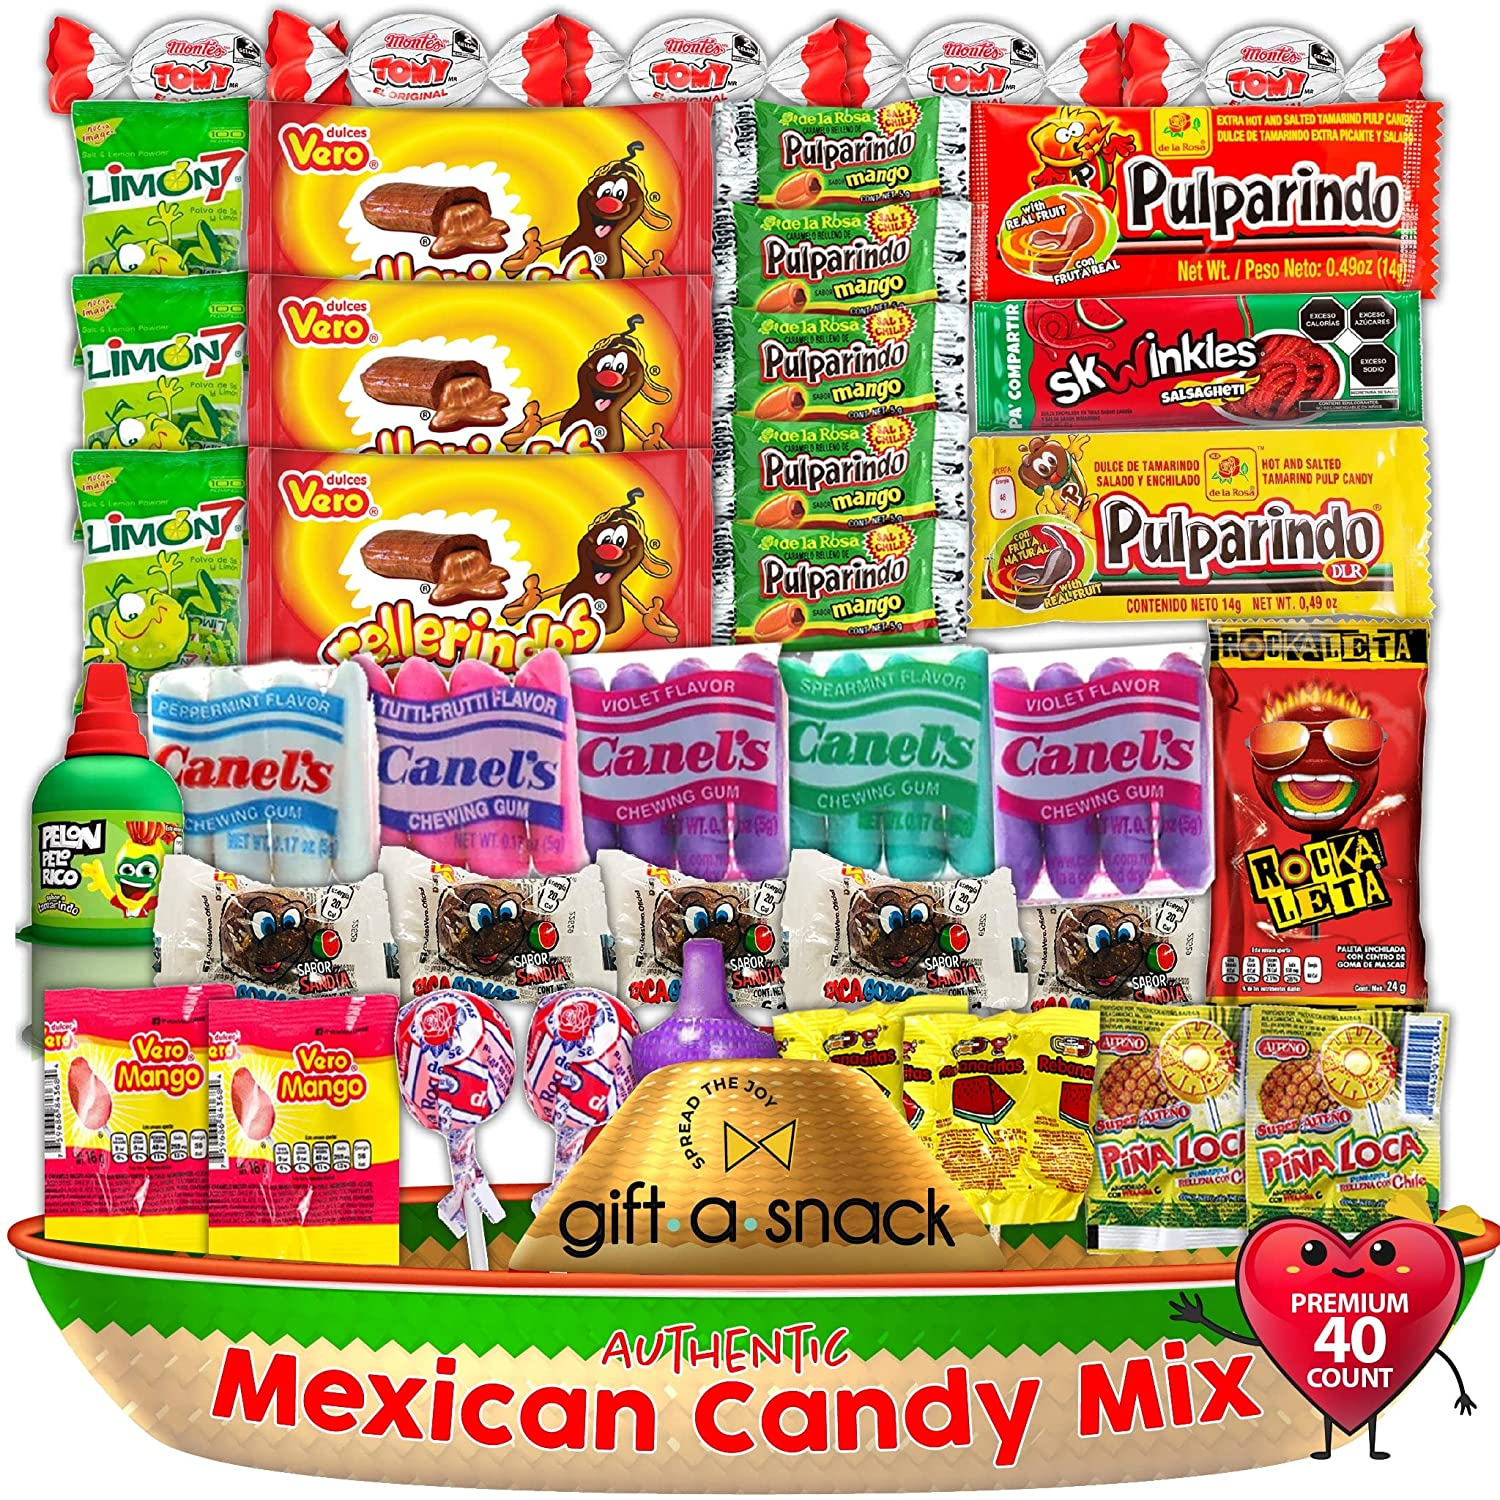 Mexican Candy Mix Dulces Mexicanos, Snack Food Gift Box Variety Pack (40 Count) Bulk Assortment of Spicy Sweet & Sour Mexicano Candies, Rockaleta Lollipop Luca Pelon Pulparindo Rellerindo, Prime